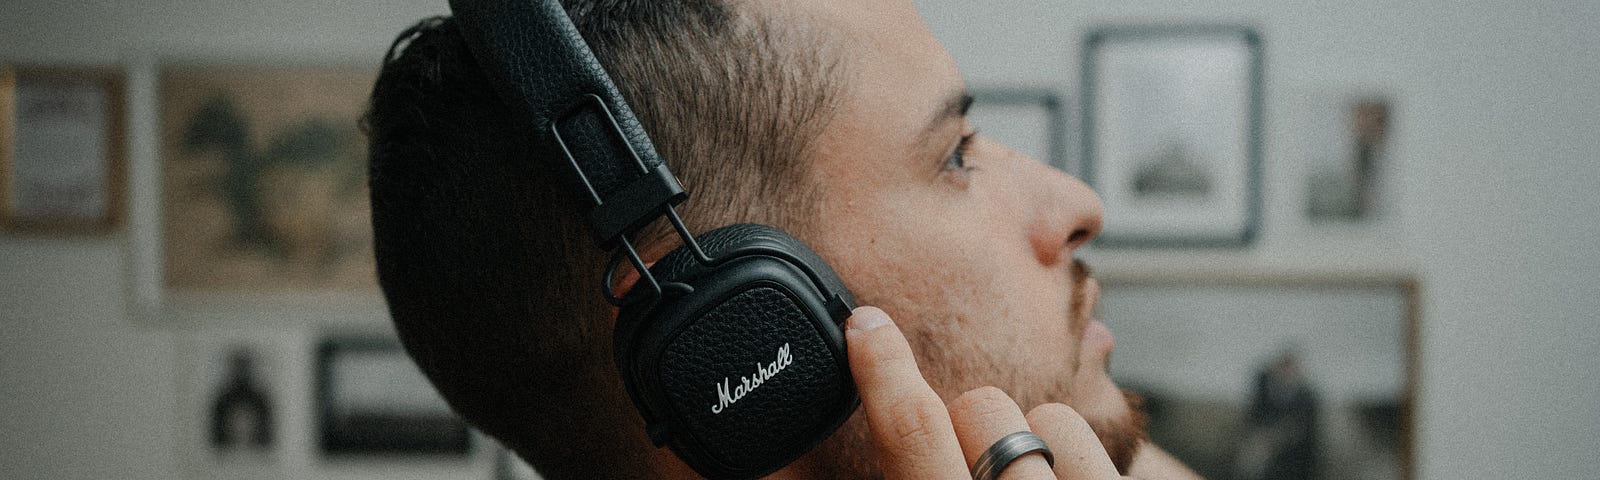 Man looking up while listening to audio on headphones.